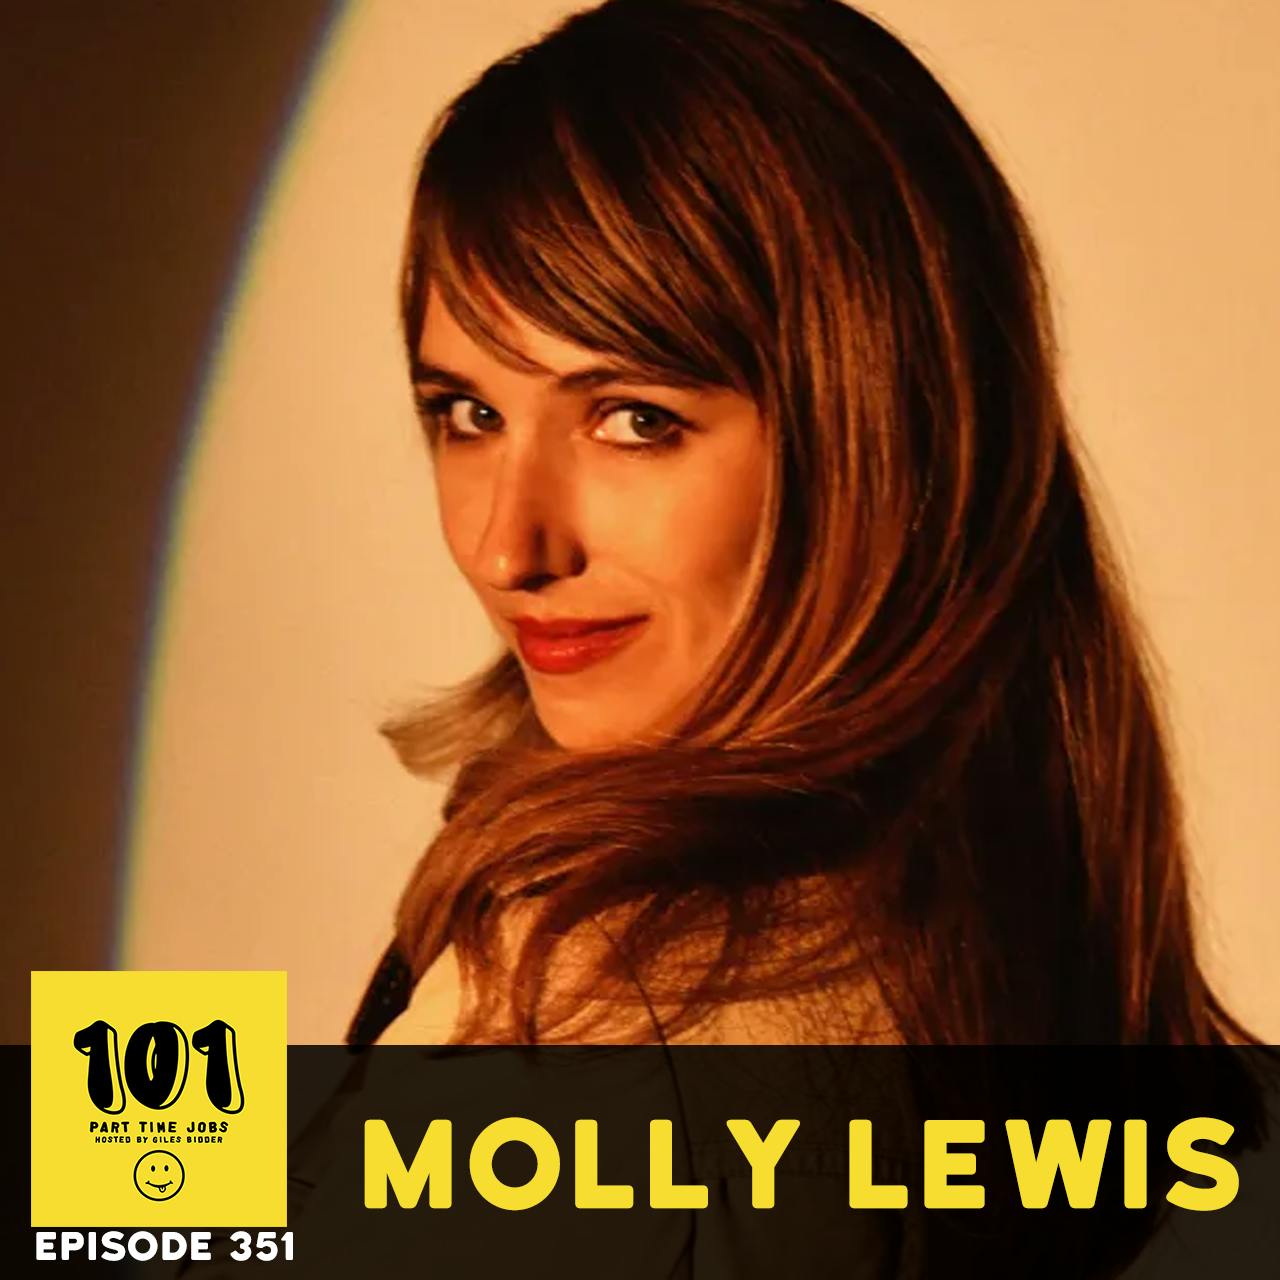 Molly Lewis - Causing Elon Musk's delayed meeting